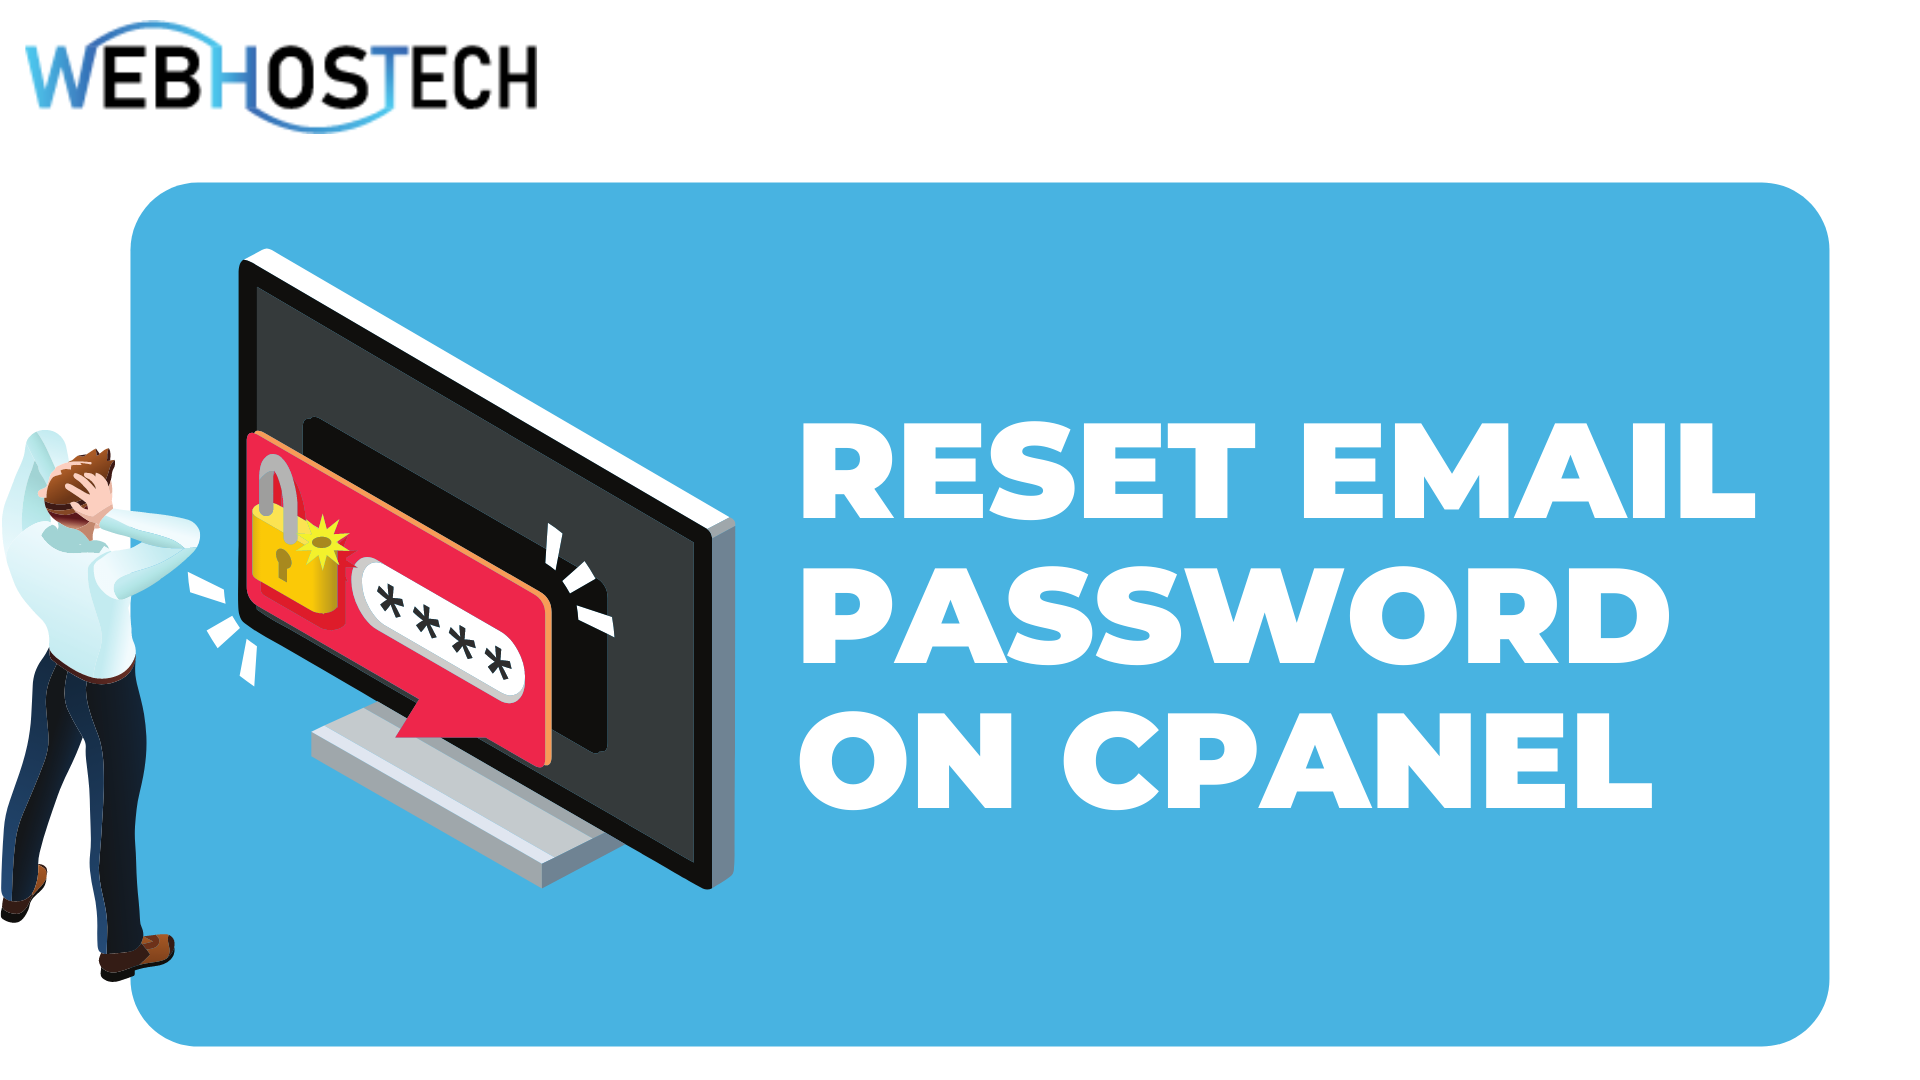 Steps to change/Reset Email password on cPanel